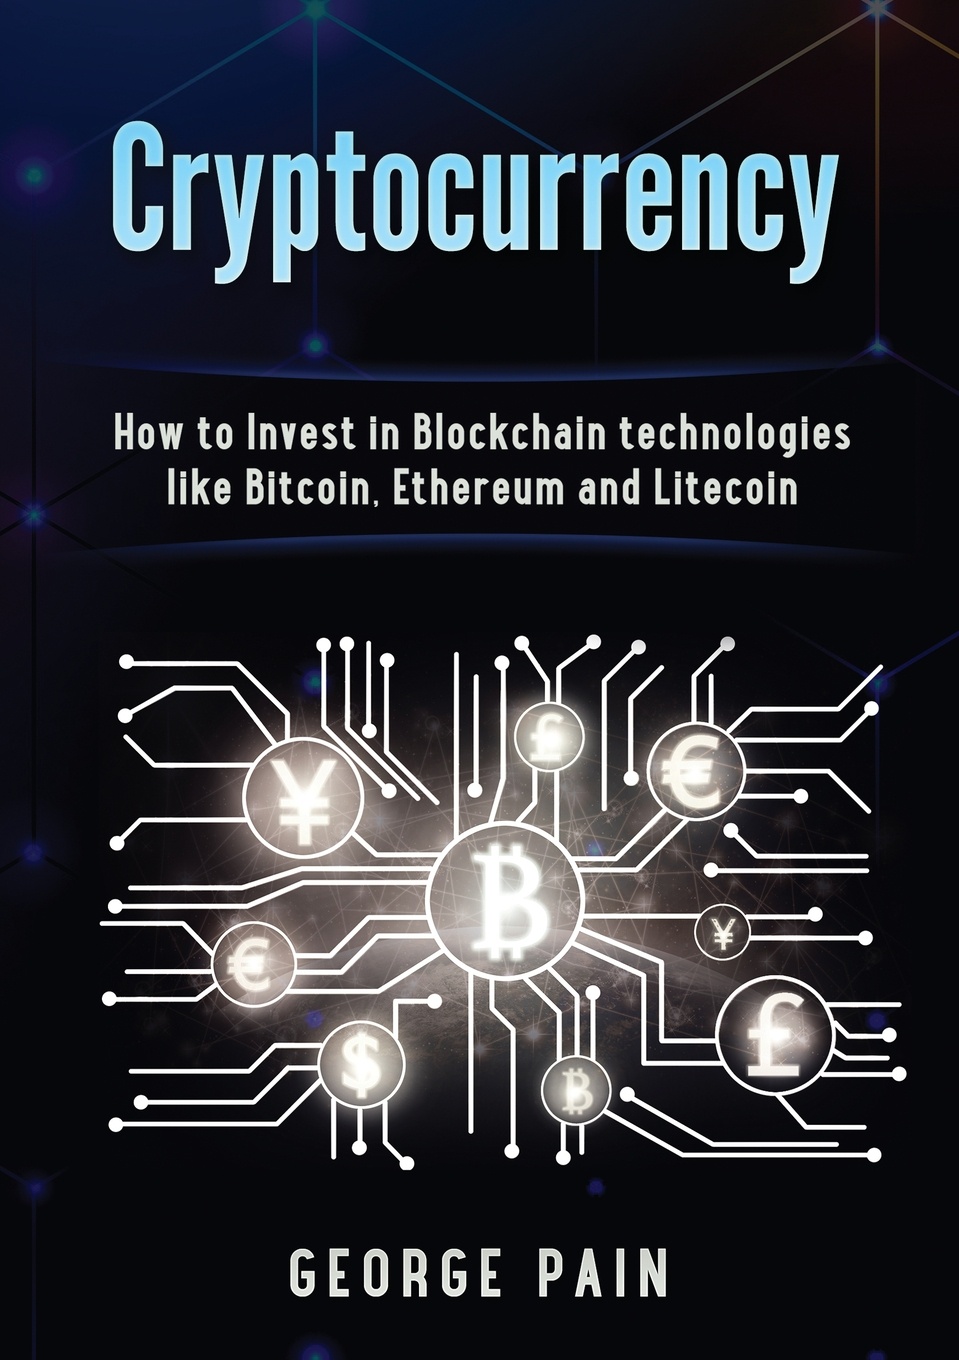 Cryptocurrency. How to Invest in Blockchain technologies like Bitcoin, Ethereum and Litecoin